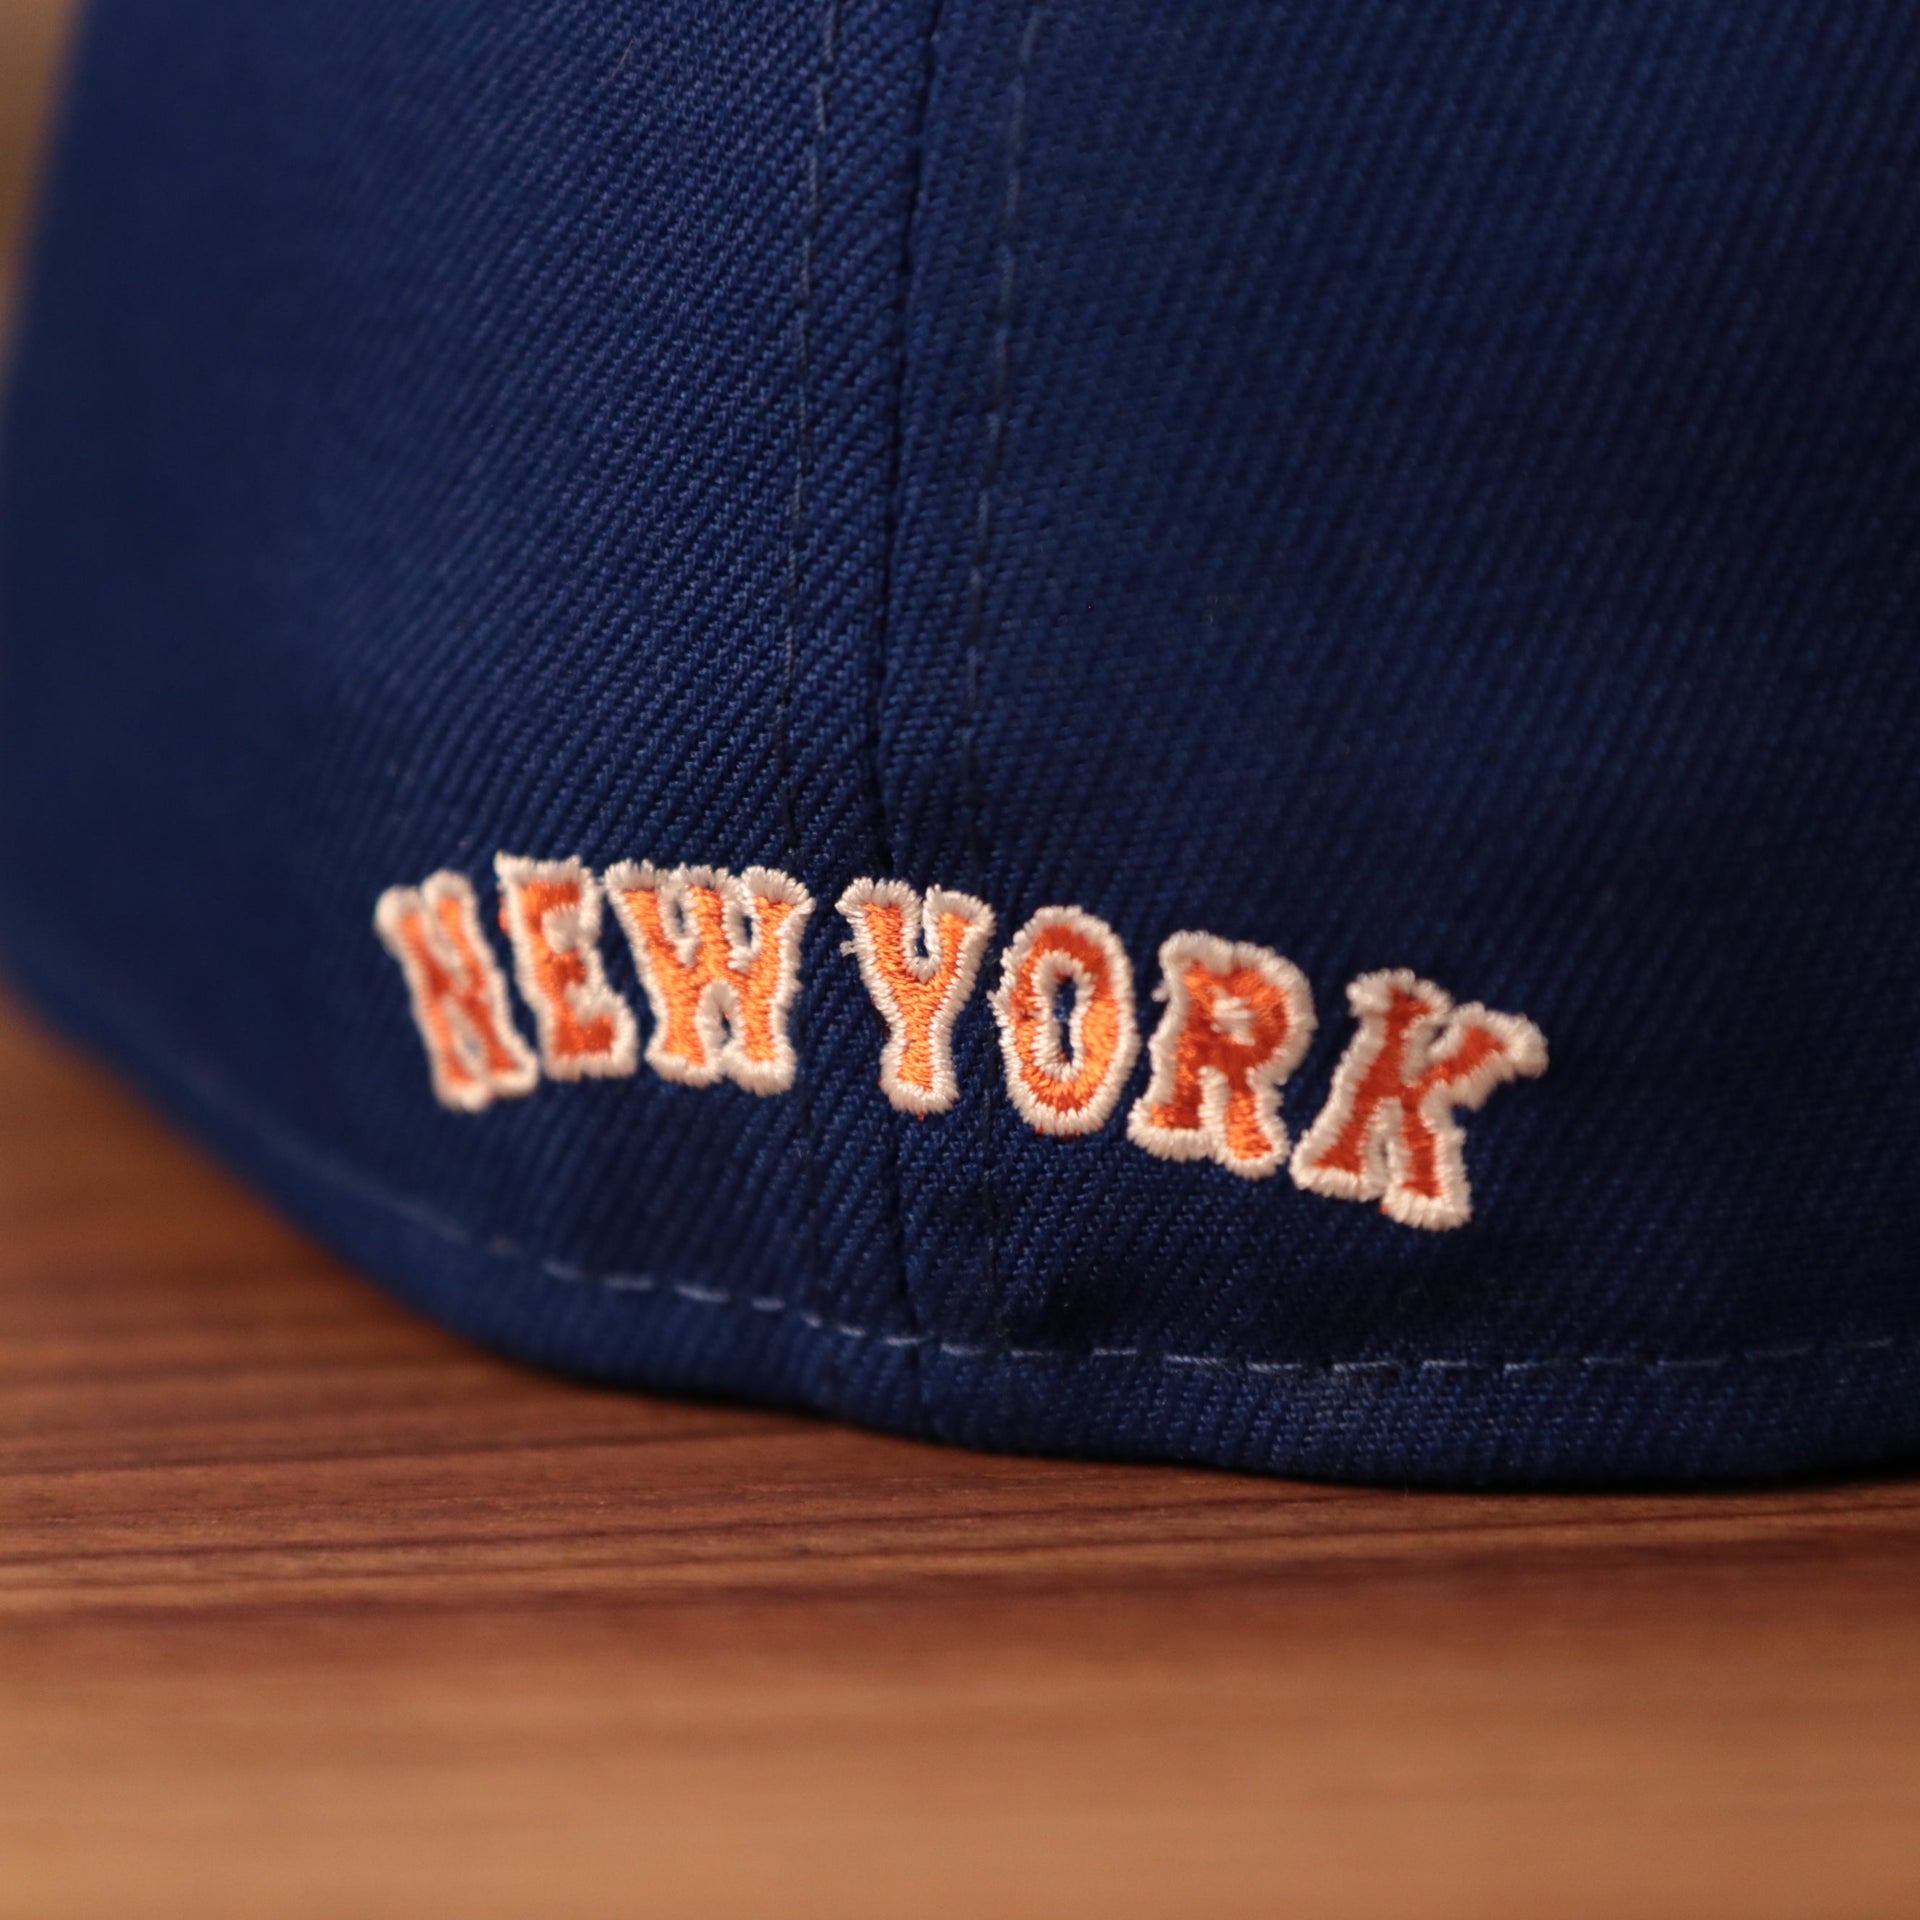 The New York Mets logo on the back side of the blue New Era fitted.